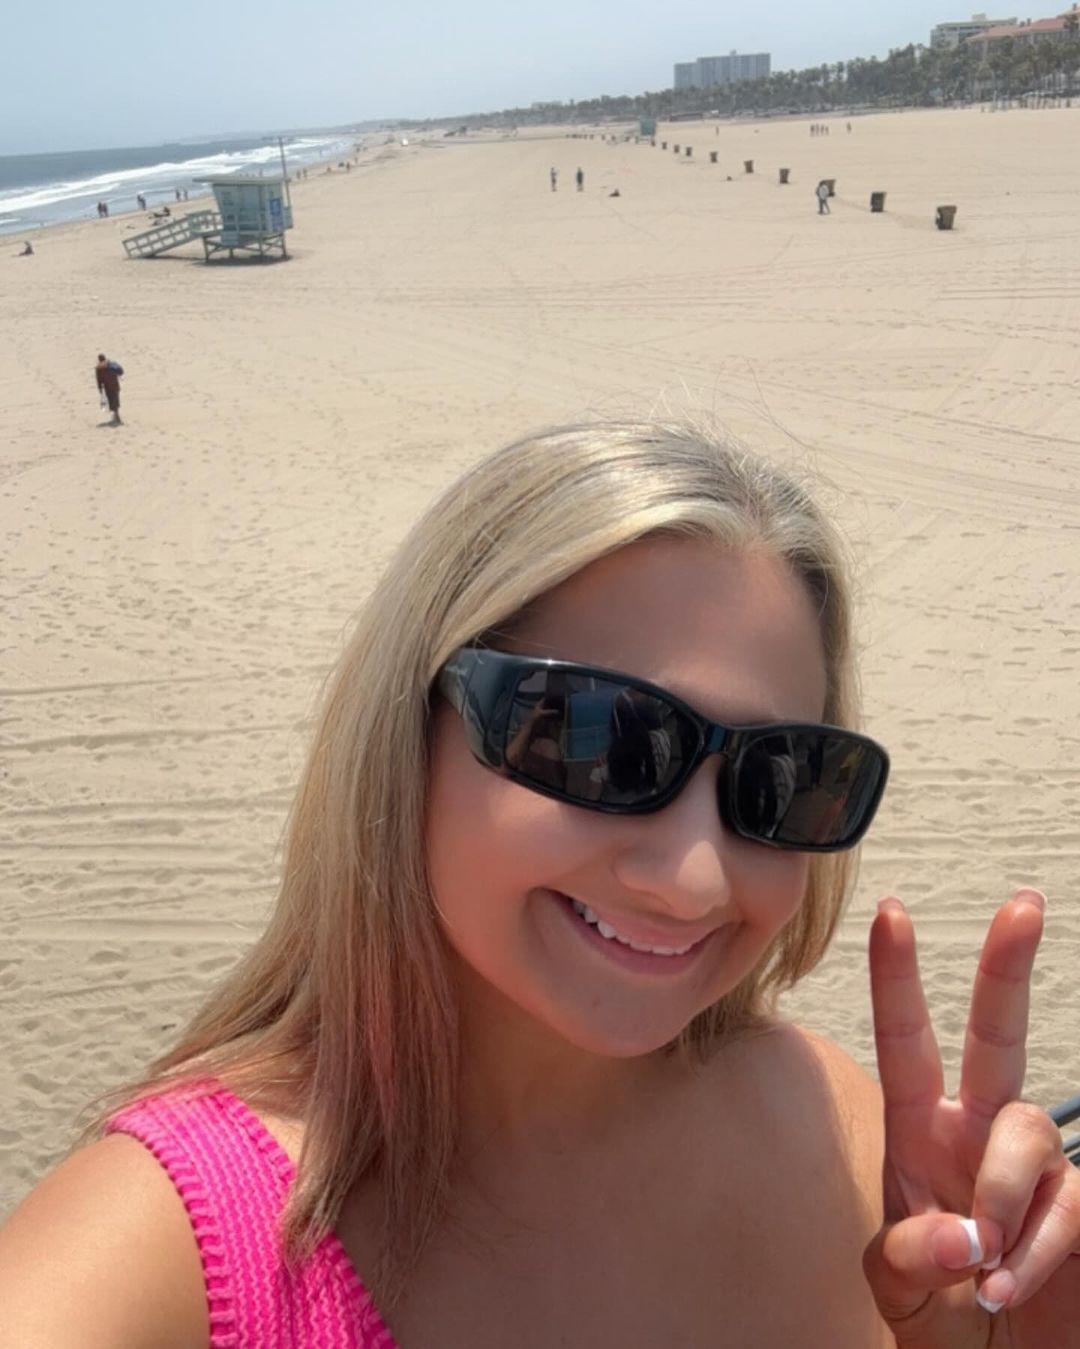 Gypsy Rose Blanchard takes selfie on the beach